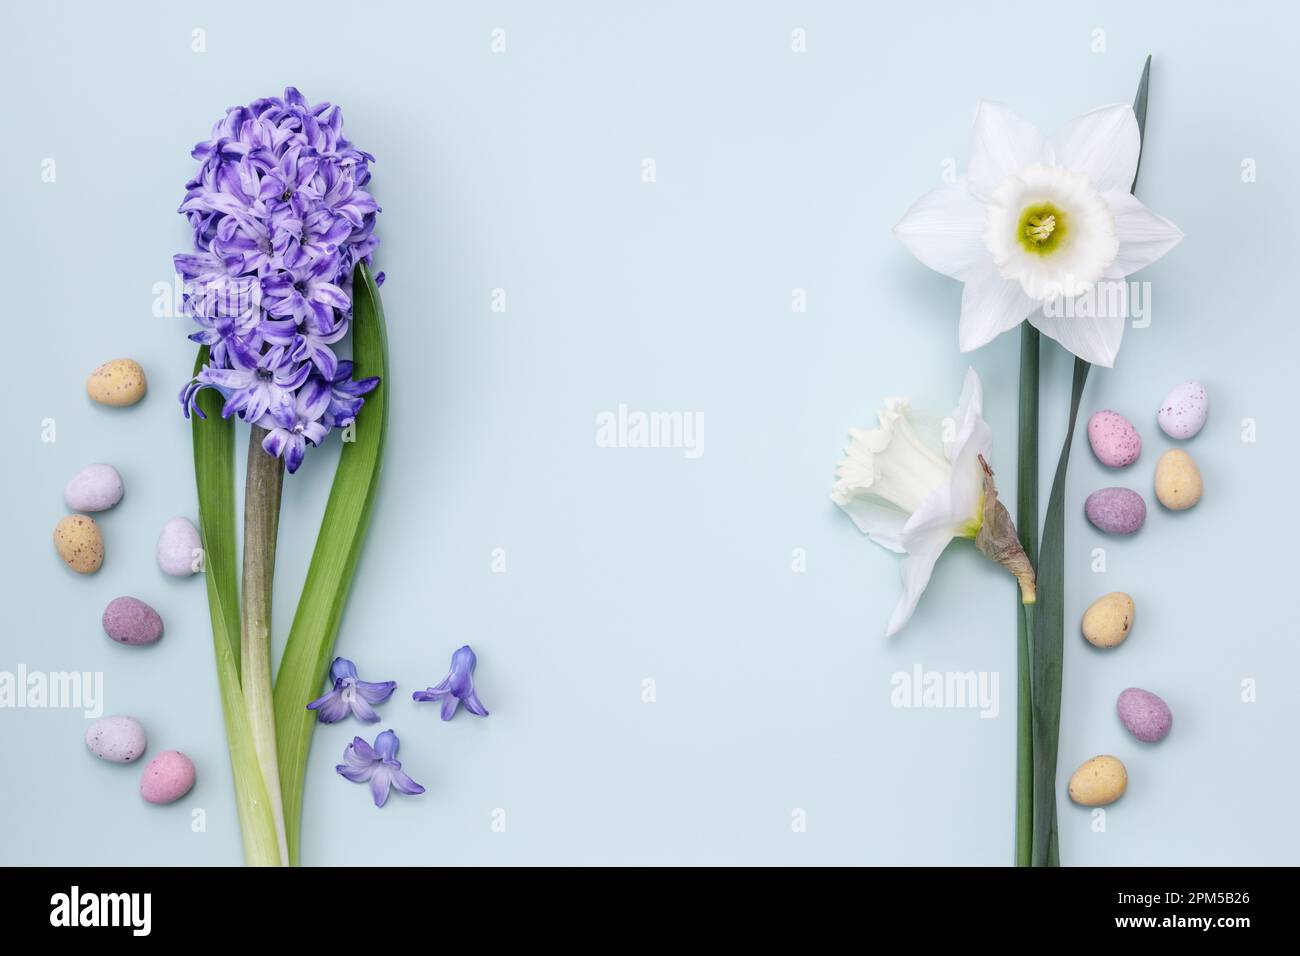 One Hyacinth and Daffodils with scattered easter eggs on pastel blue background spring still life Stock Photo